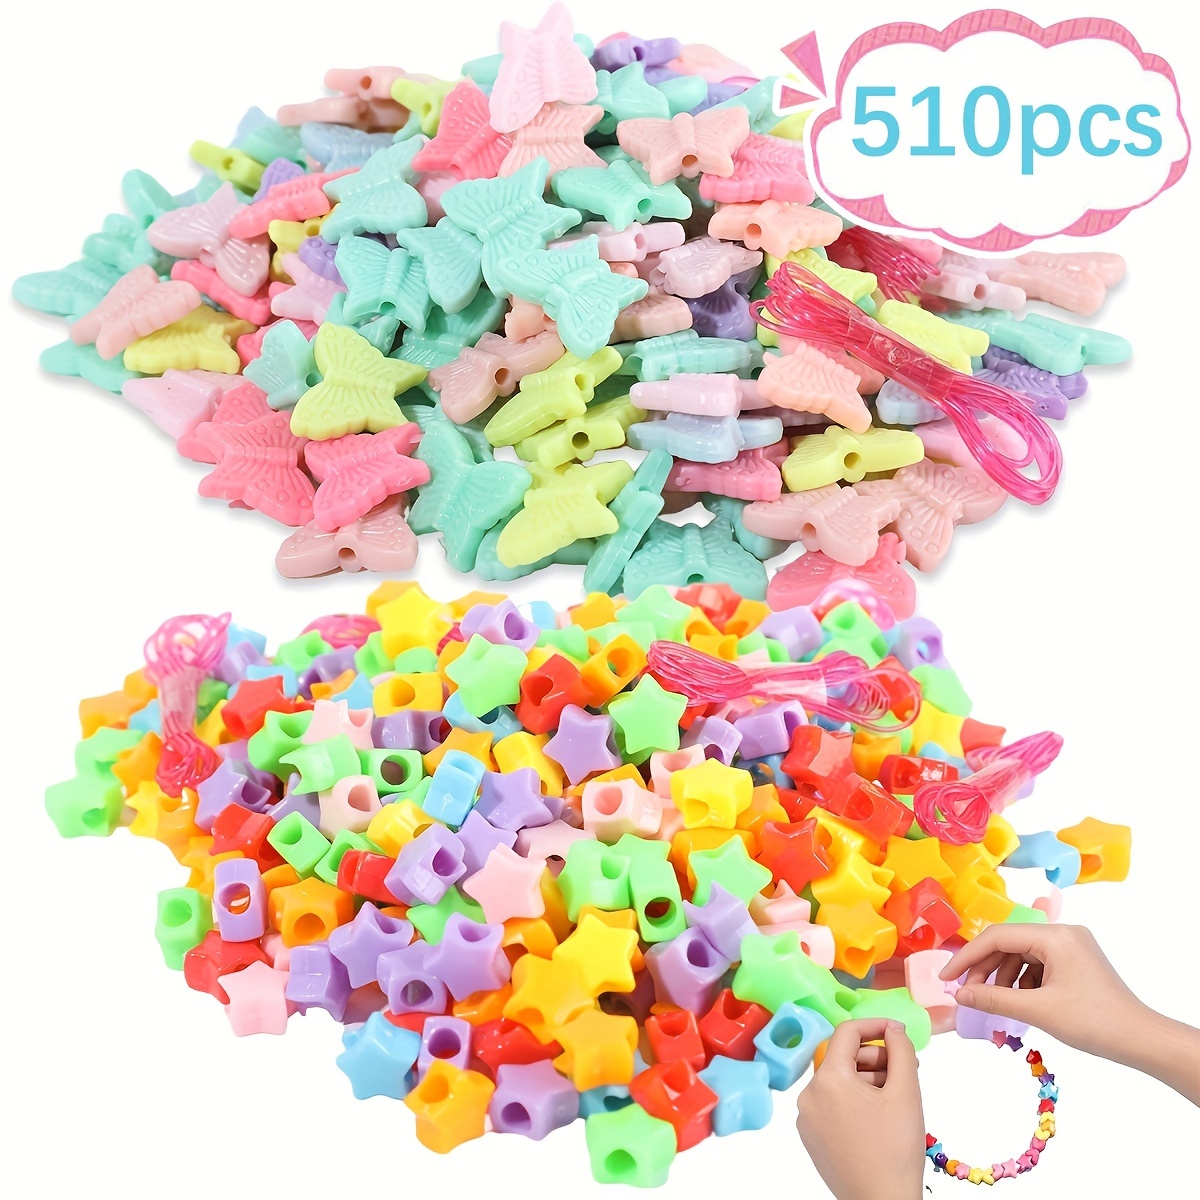 260pcs Snap Pop Beads DIY Kit: Create Unique Jewelry & Crafts for Girls -  Perfect Christmas & Birthday Gifts for Kids!